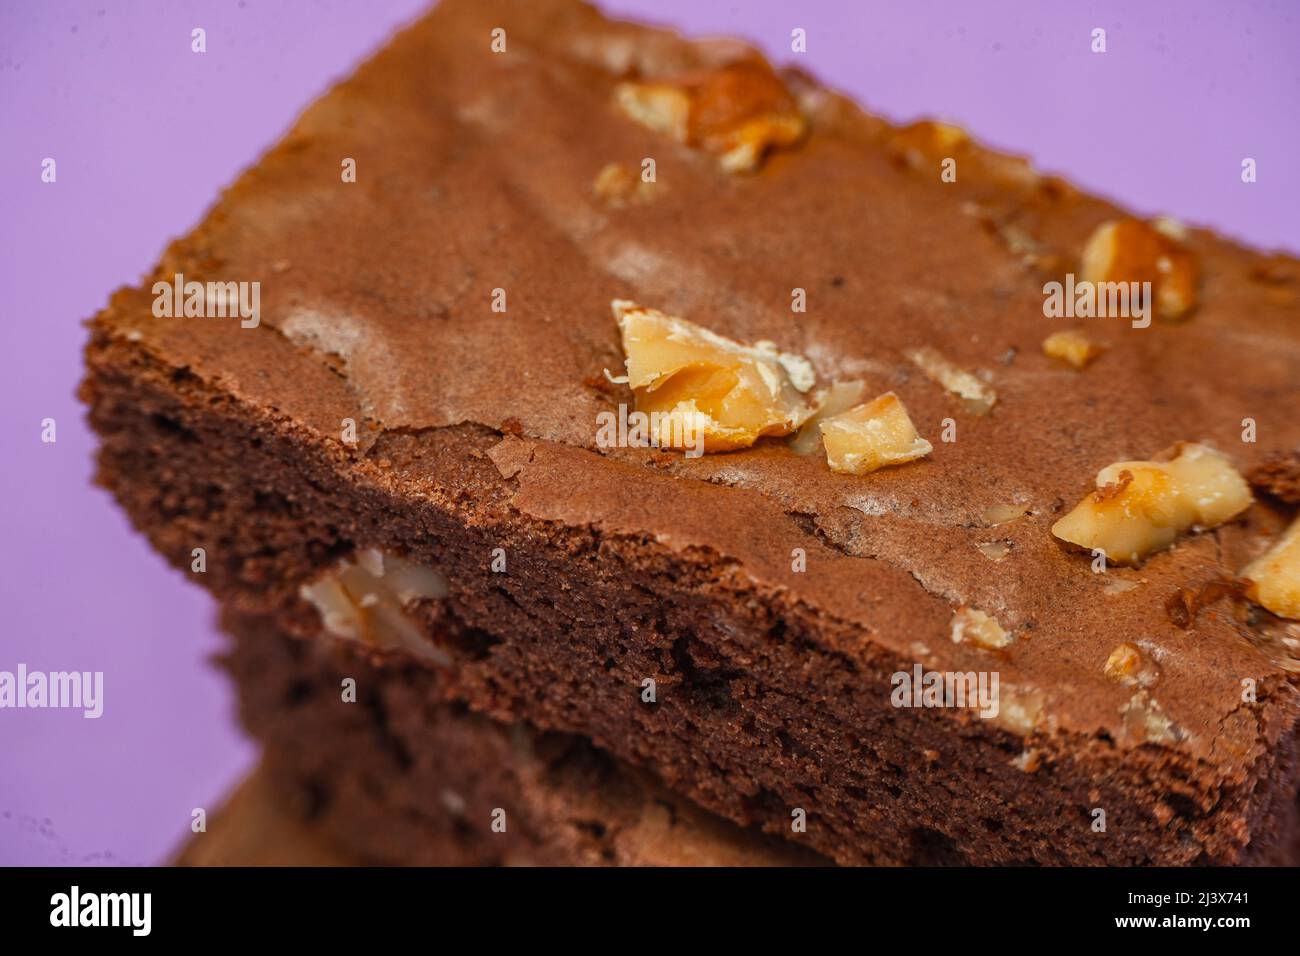 Homemade chocolate brownie squares with pecan pieces. Orange Background. Natural, healthy food concept. High view. Stock Photo